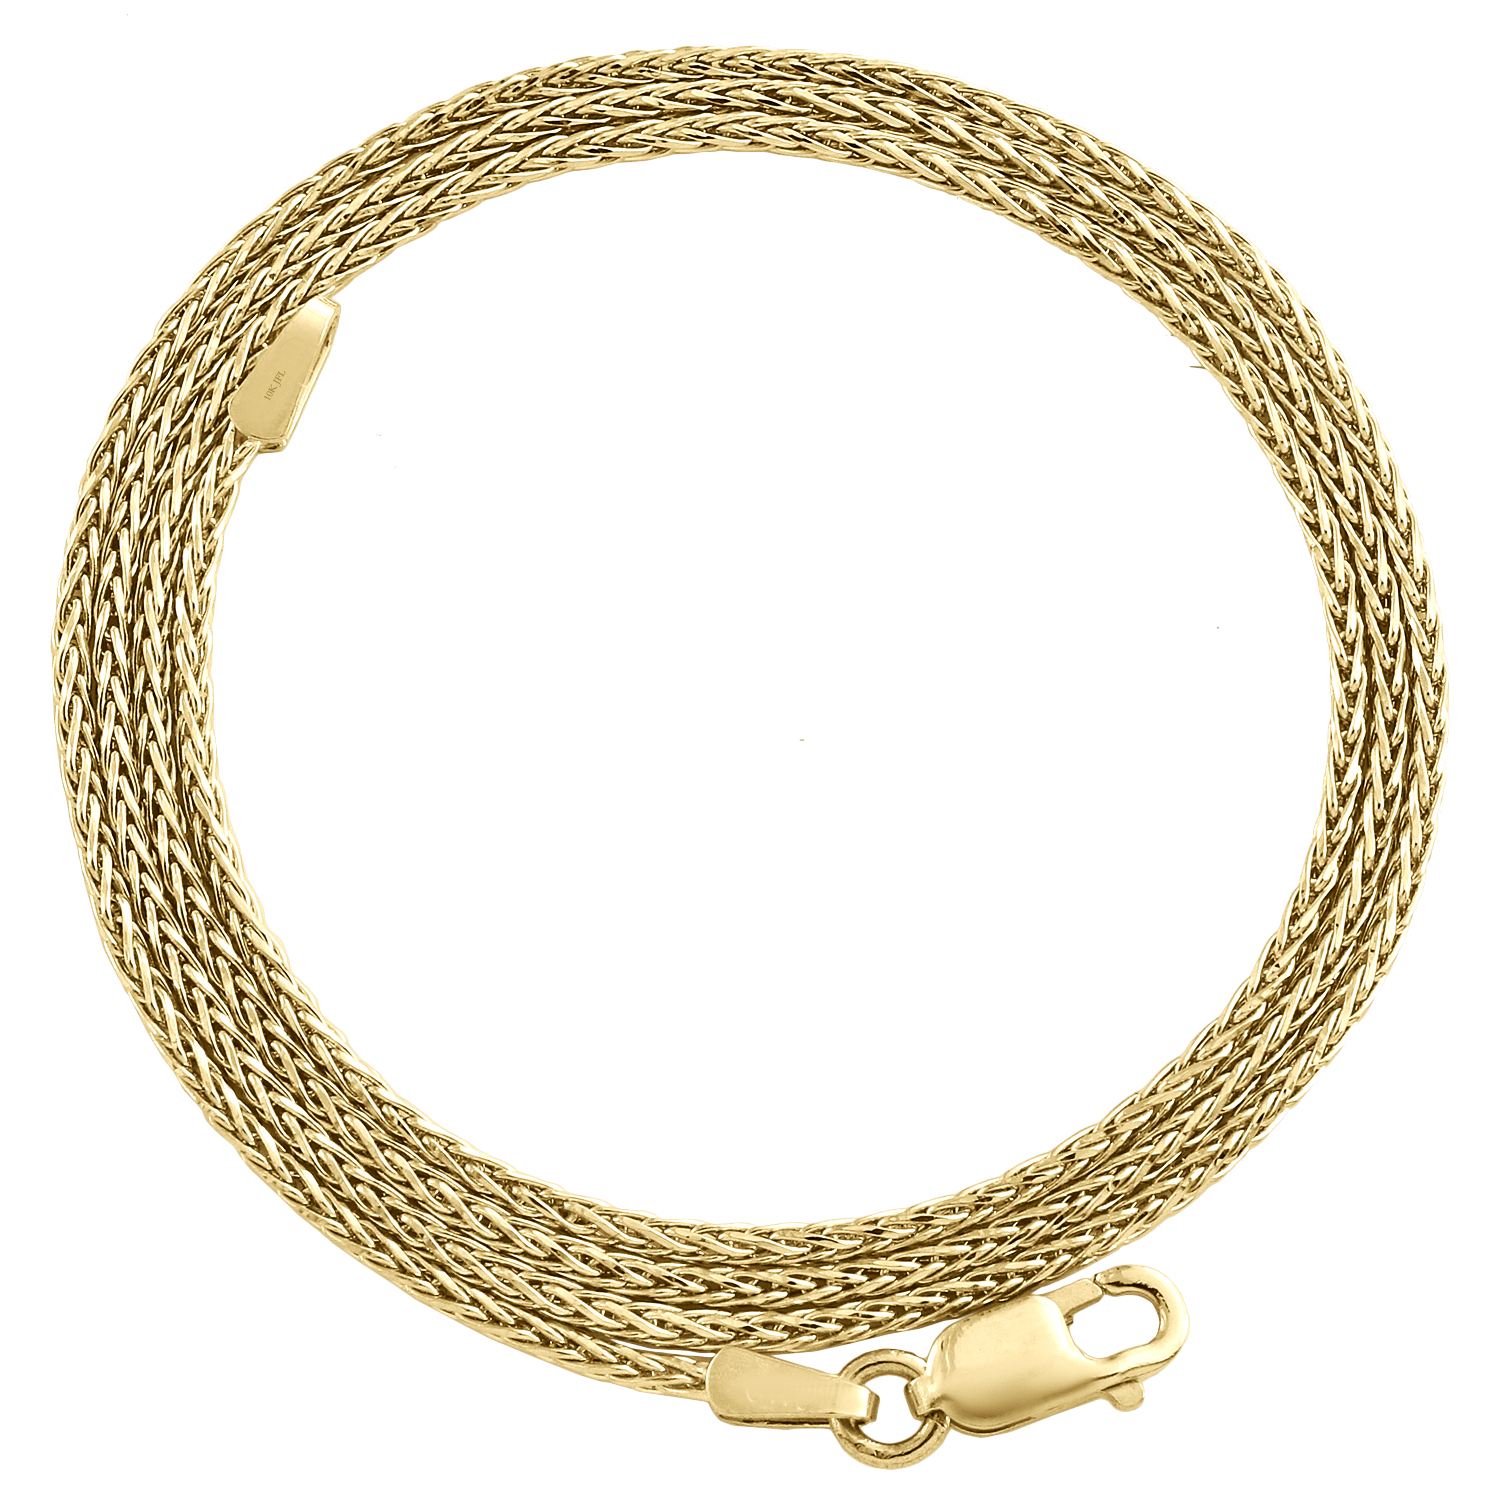 10K Yellow Gold 1.25mm Round Spiga Link Chain Fancy Italian Necklace 16